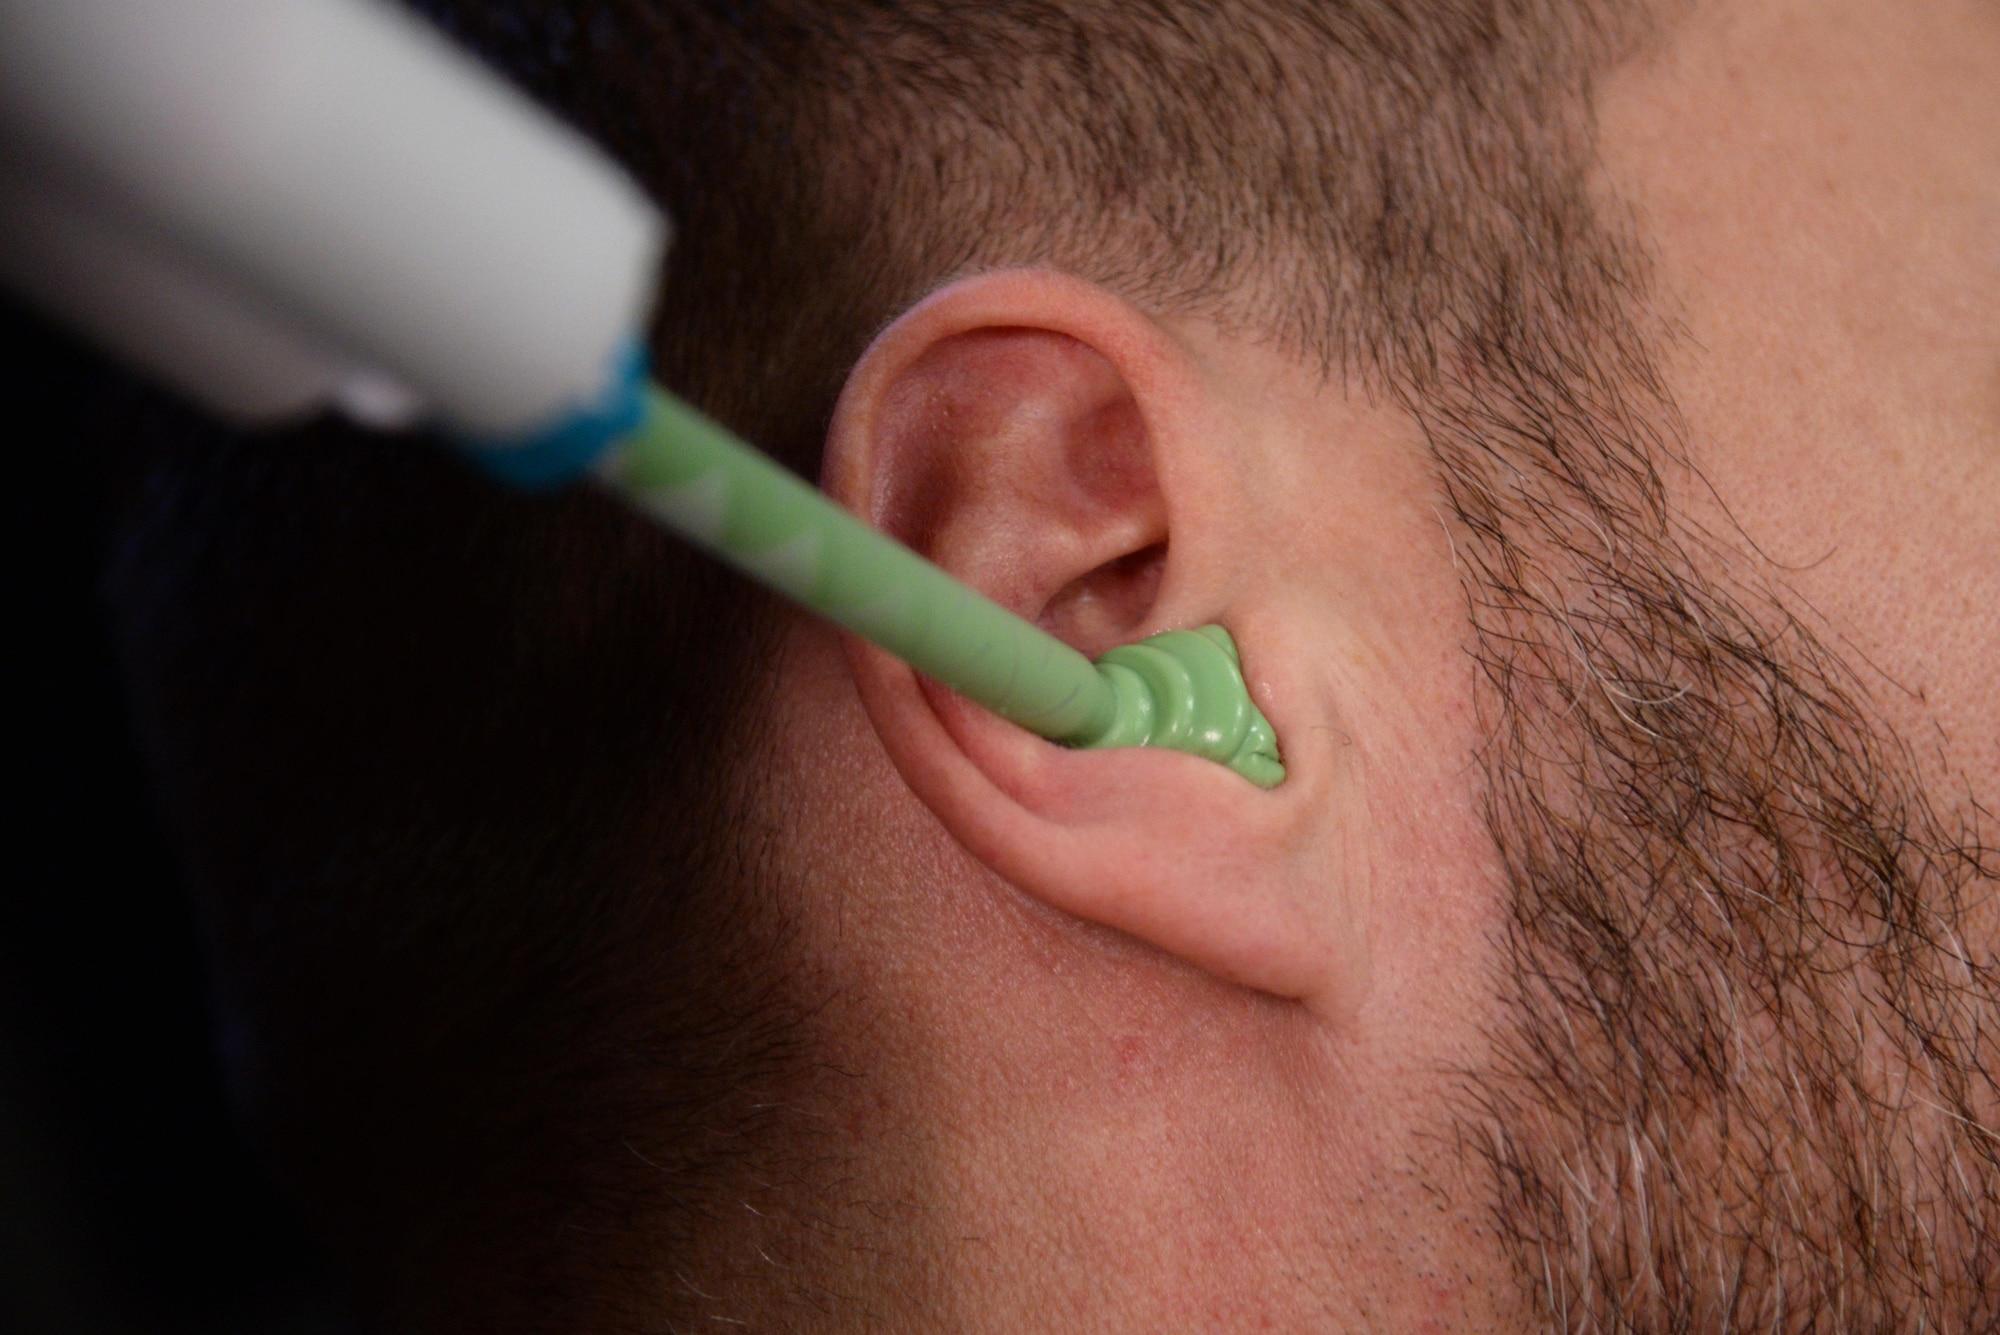 Molding material is applied to the ear of an Air Force Office of Special Investigations agent at an OSI office at Ramstein Air Base, Germany, Jan. 6, 2017. Approximately $20,000 was saved by deciding to not use an outside contractor with this effort. (U.S. Air Force photo by Airman 1st Class D. Blake Browning)